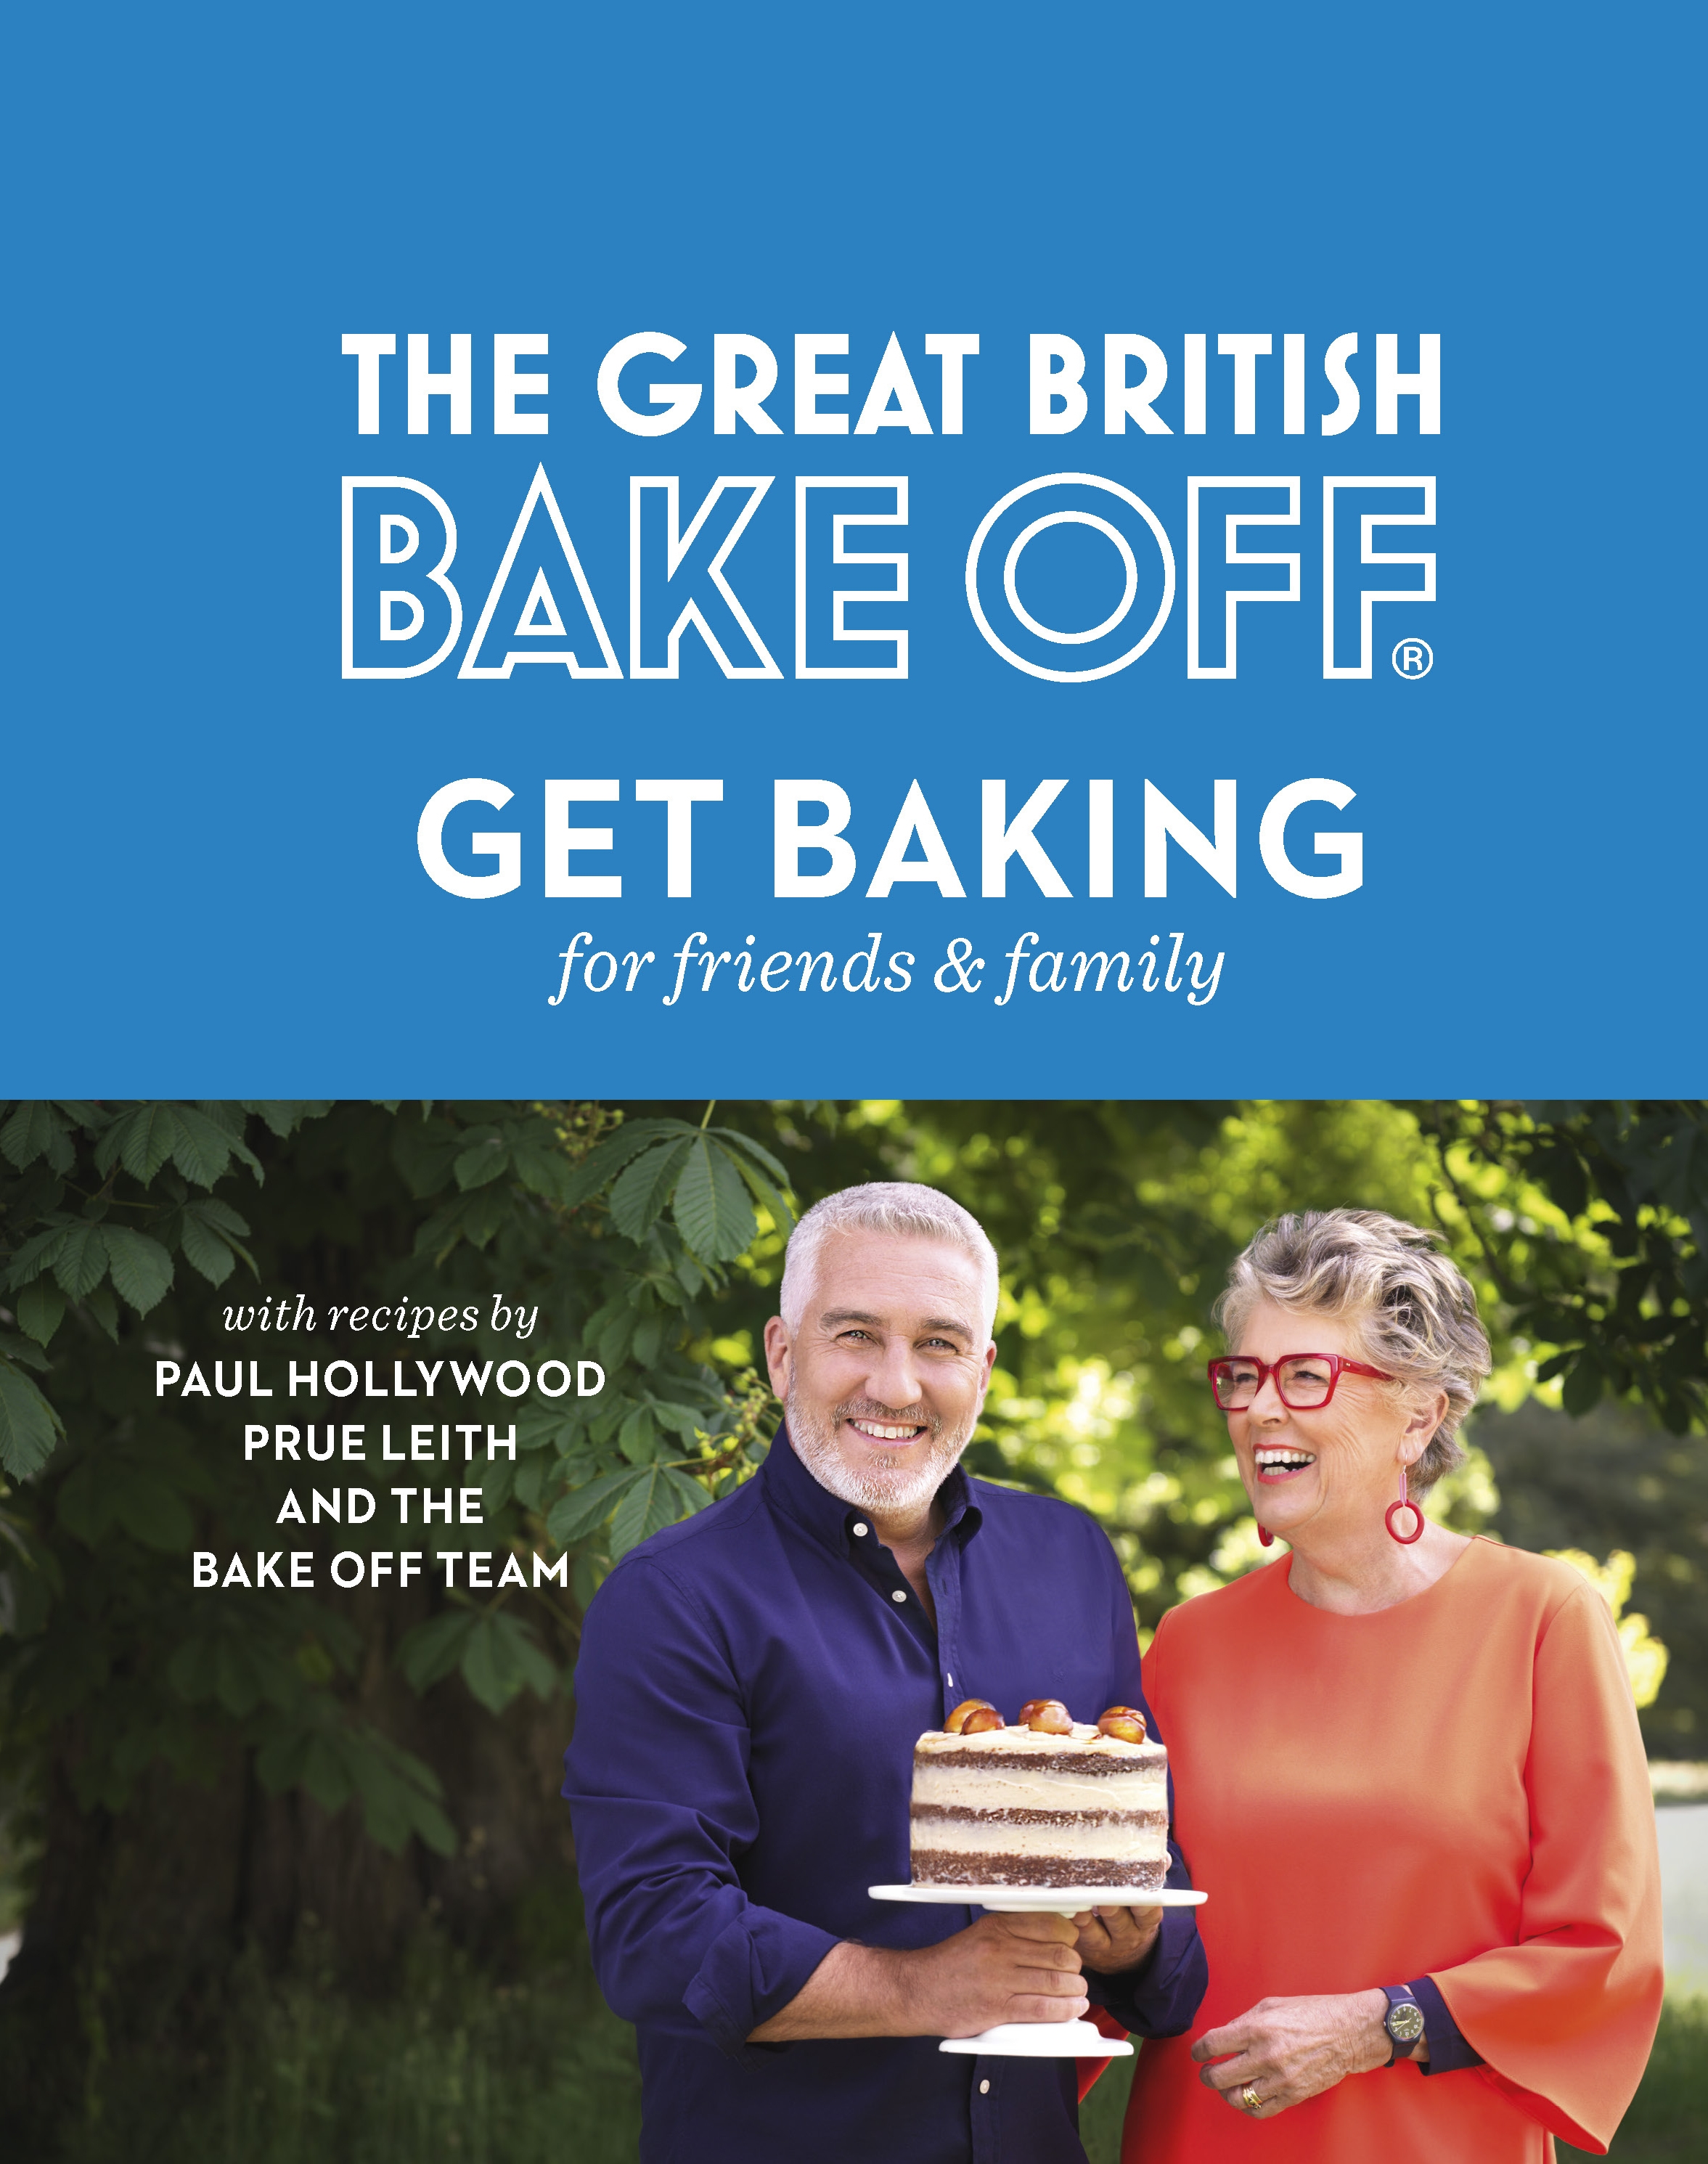 The Great British Bake Off Get Baking cover.